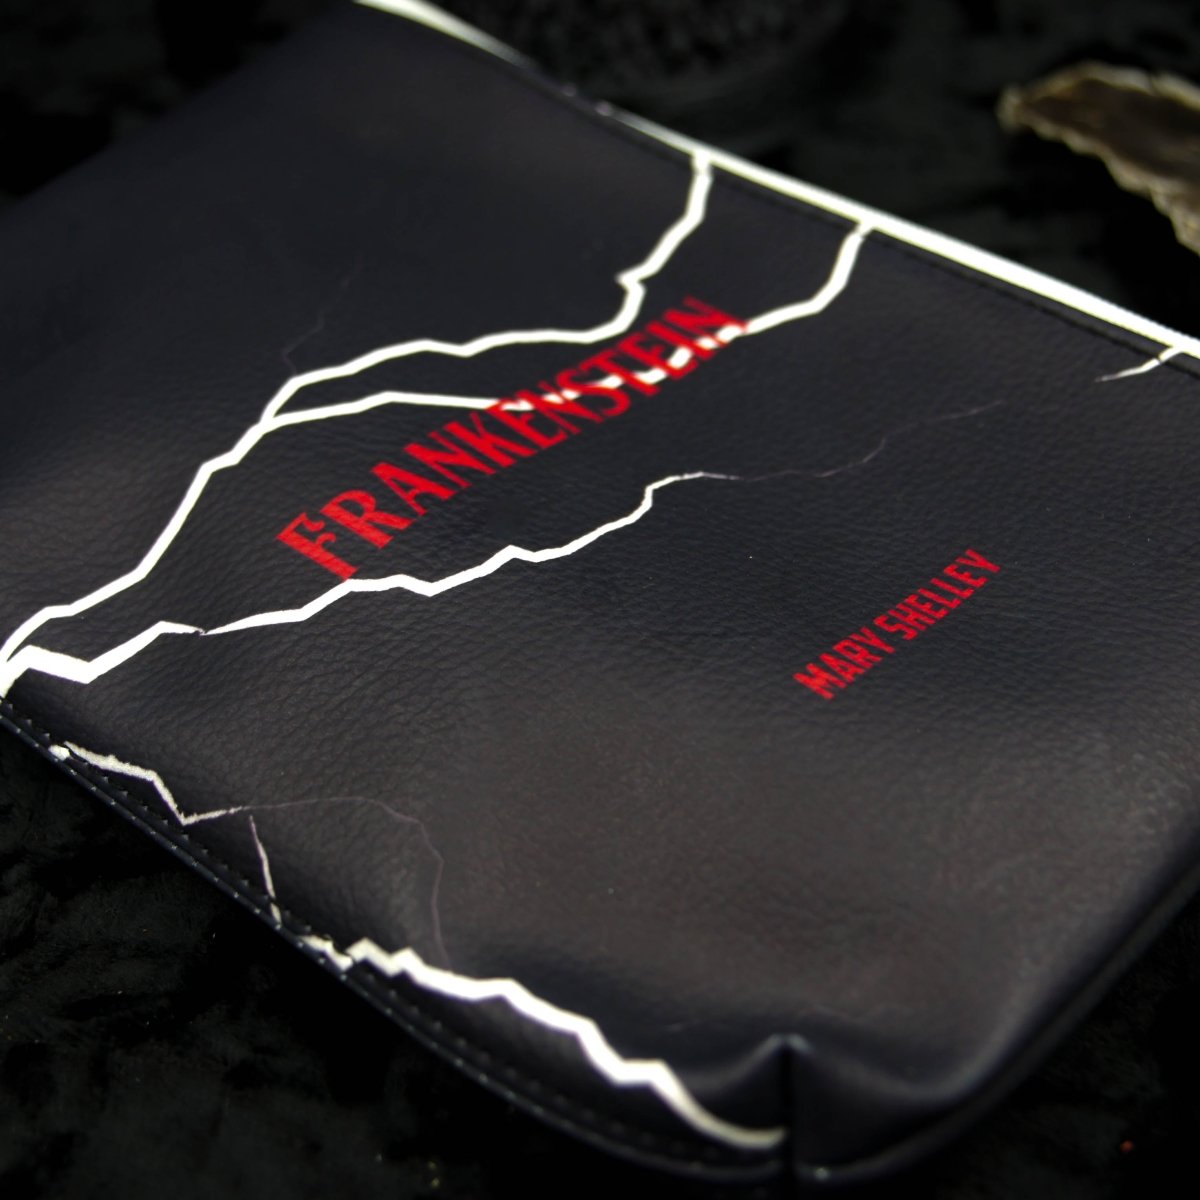 Frankenstein Pencil Case | Well Read Company - The Gothic Stationery Company - Gadget Cases